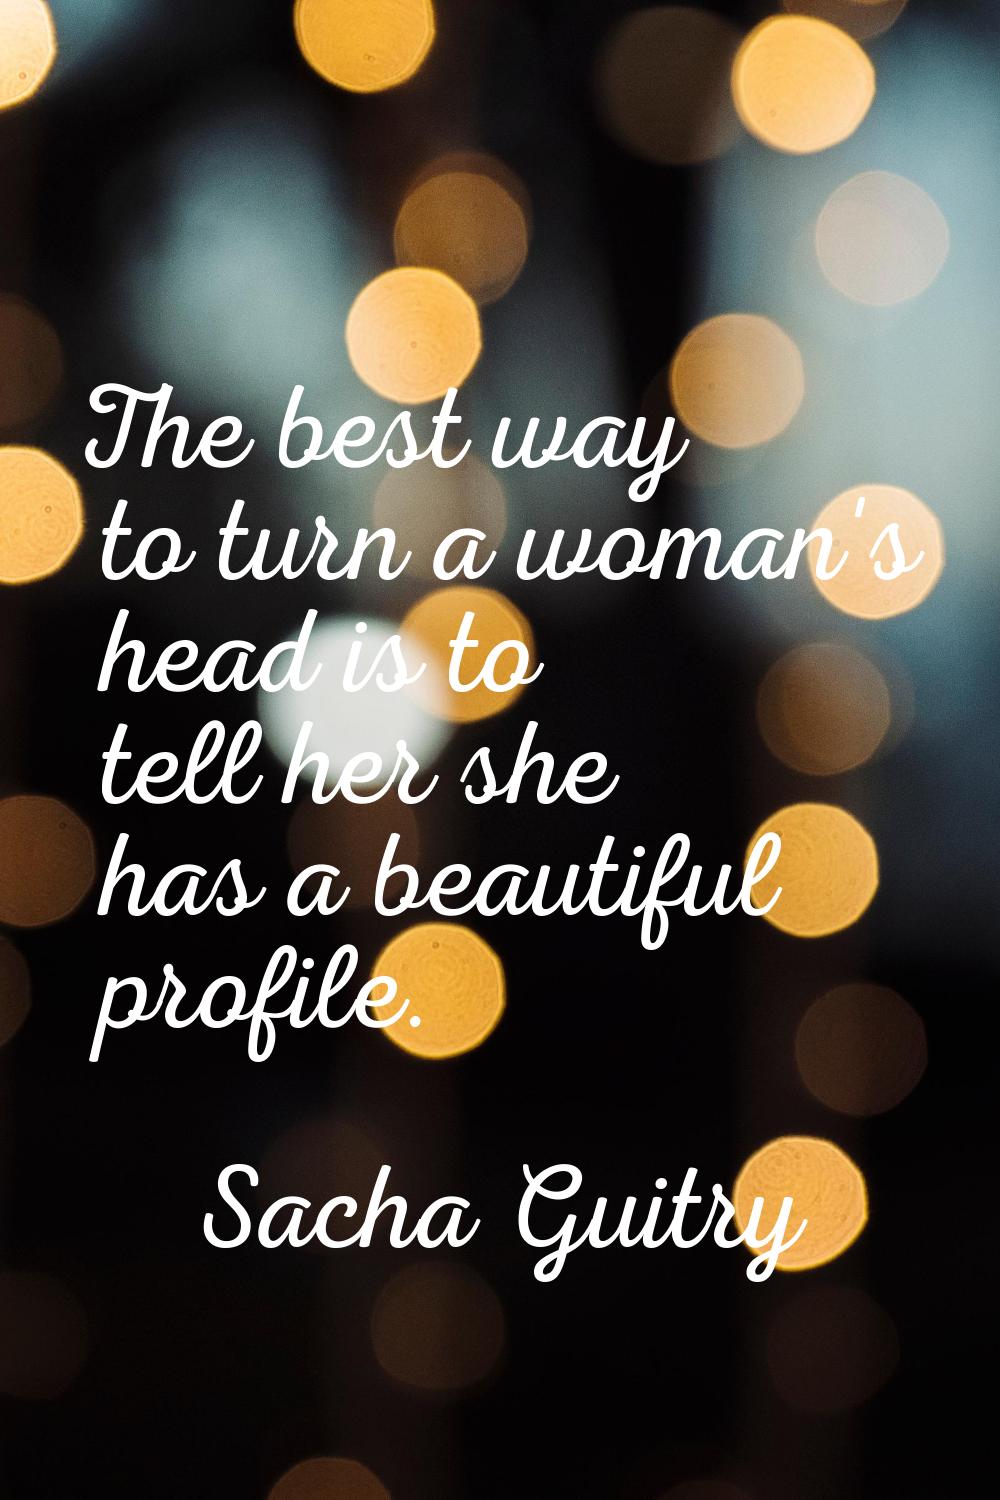 The best way to turn a woman's head is to tell her she has a beautiful profile.